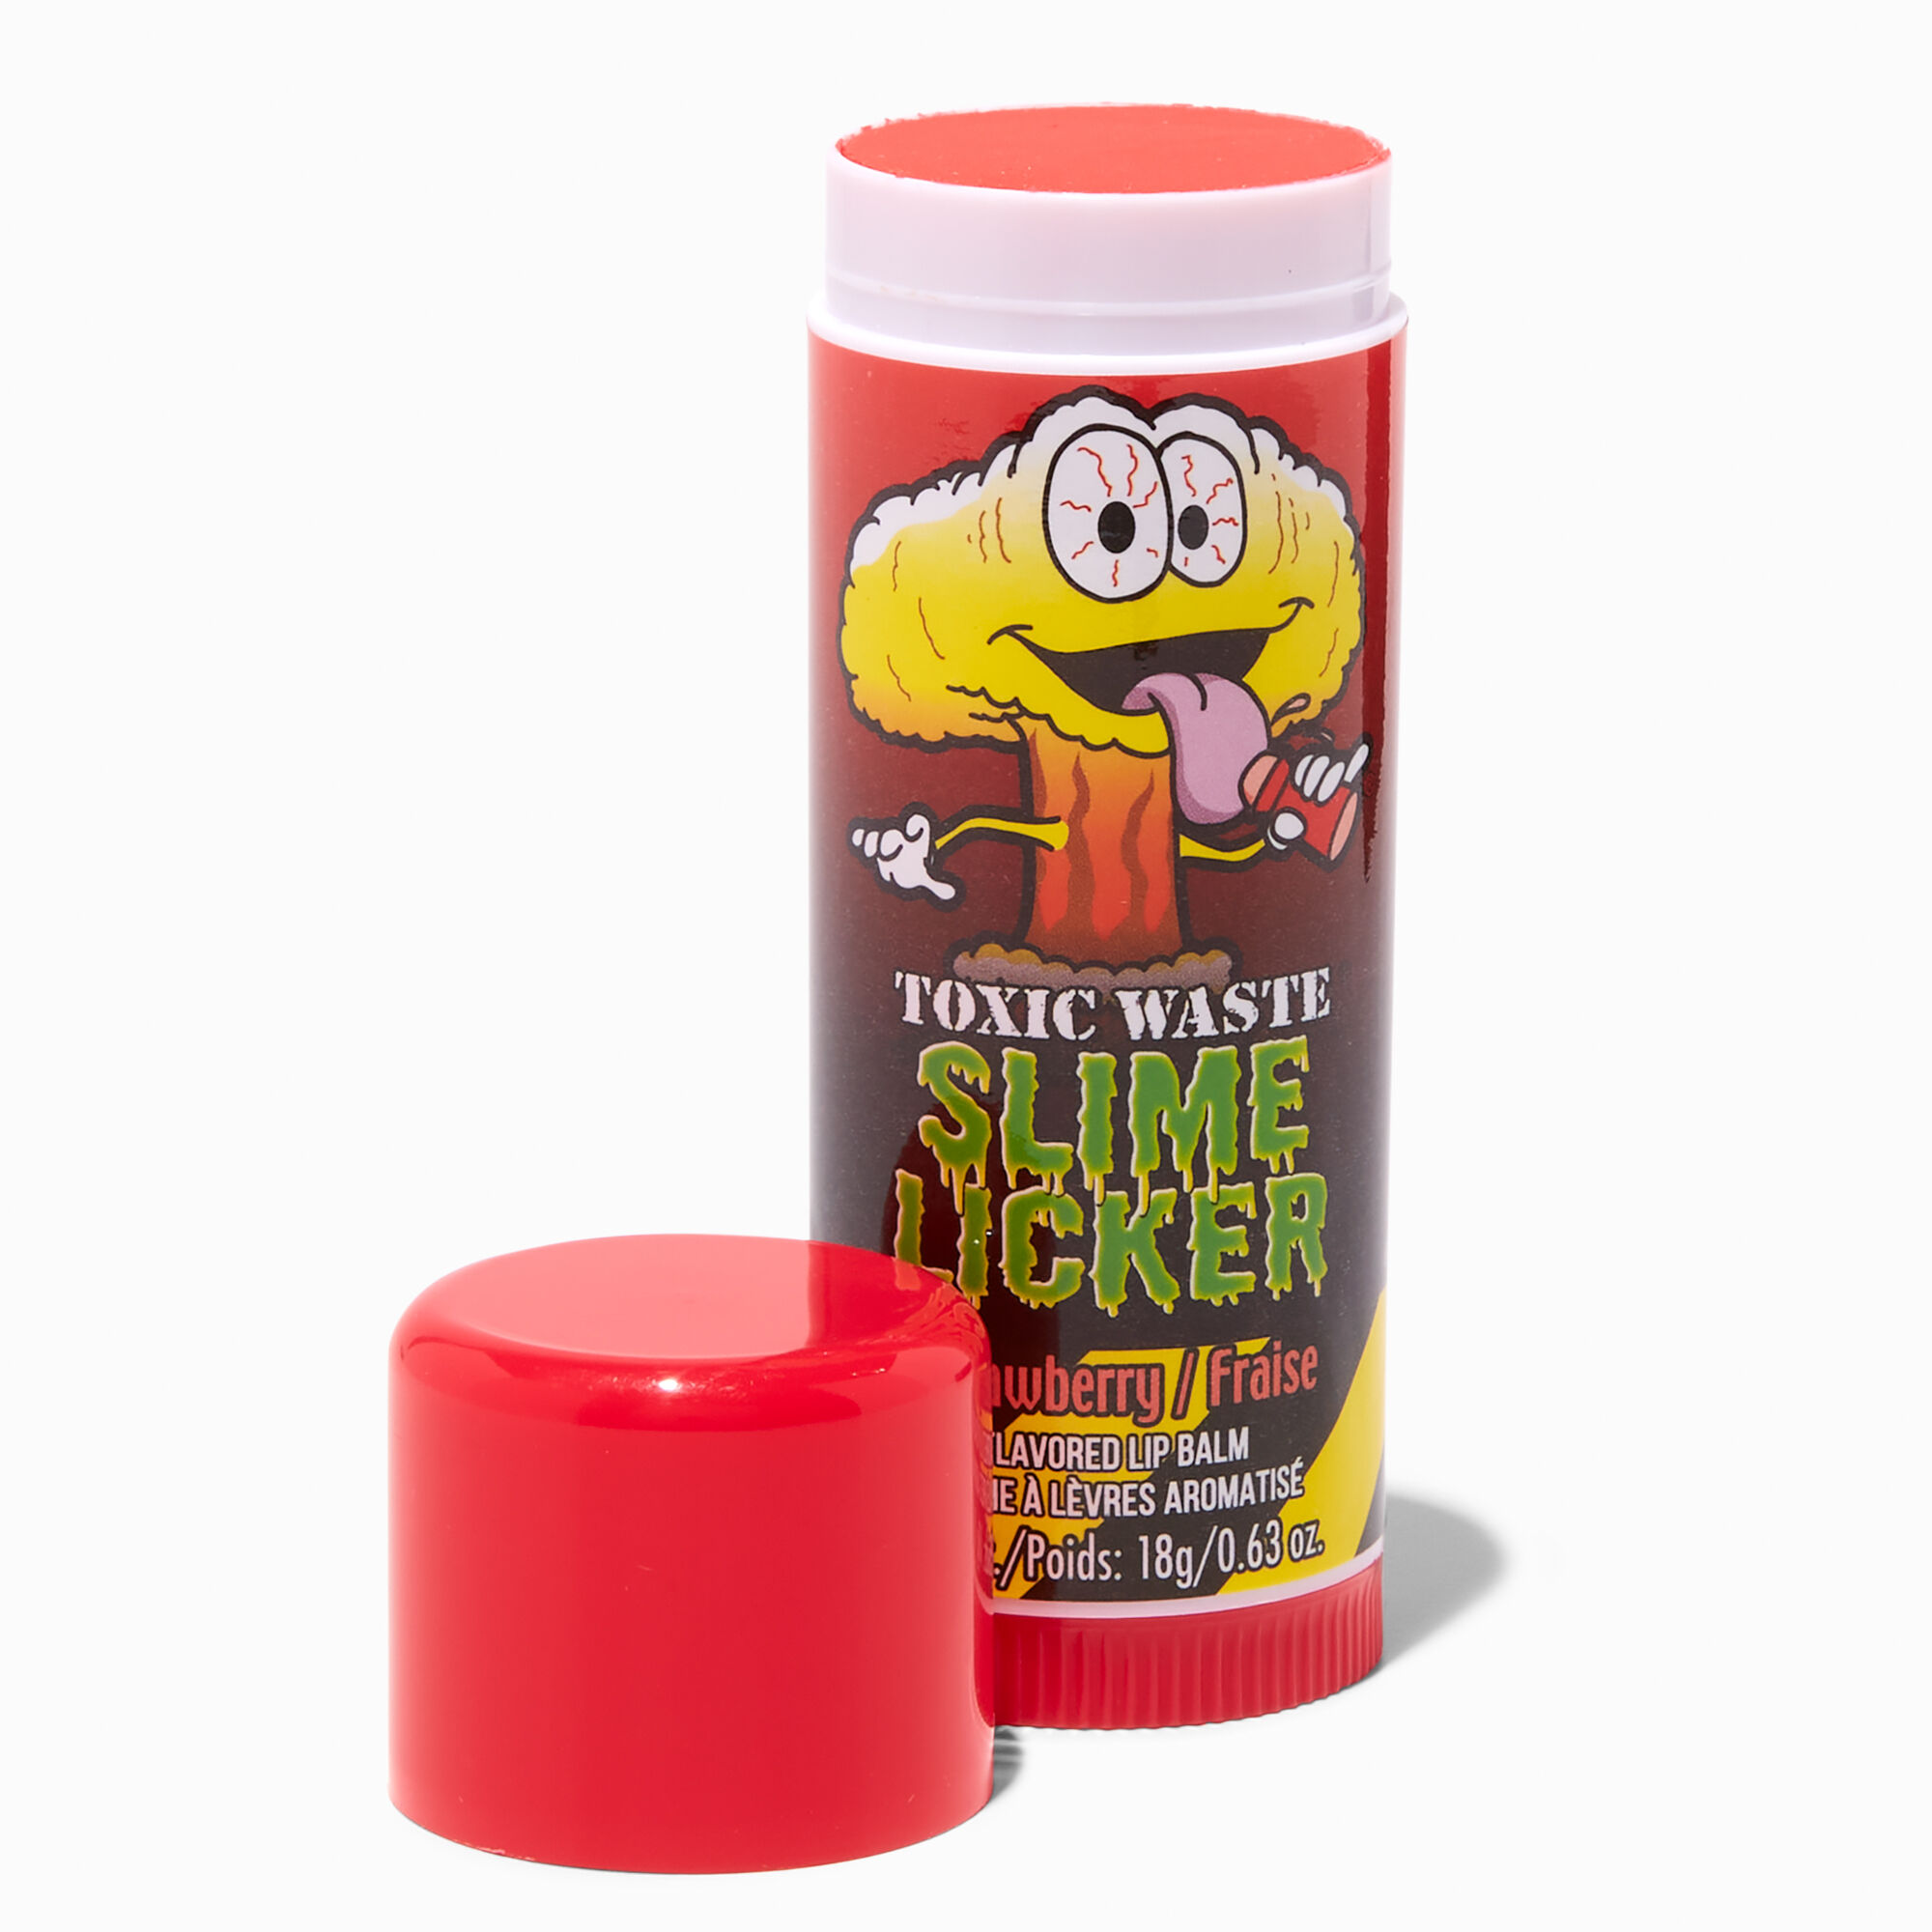 View Claires Toxic Waste Slime Licker Humongous Lip Balm information